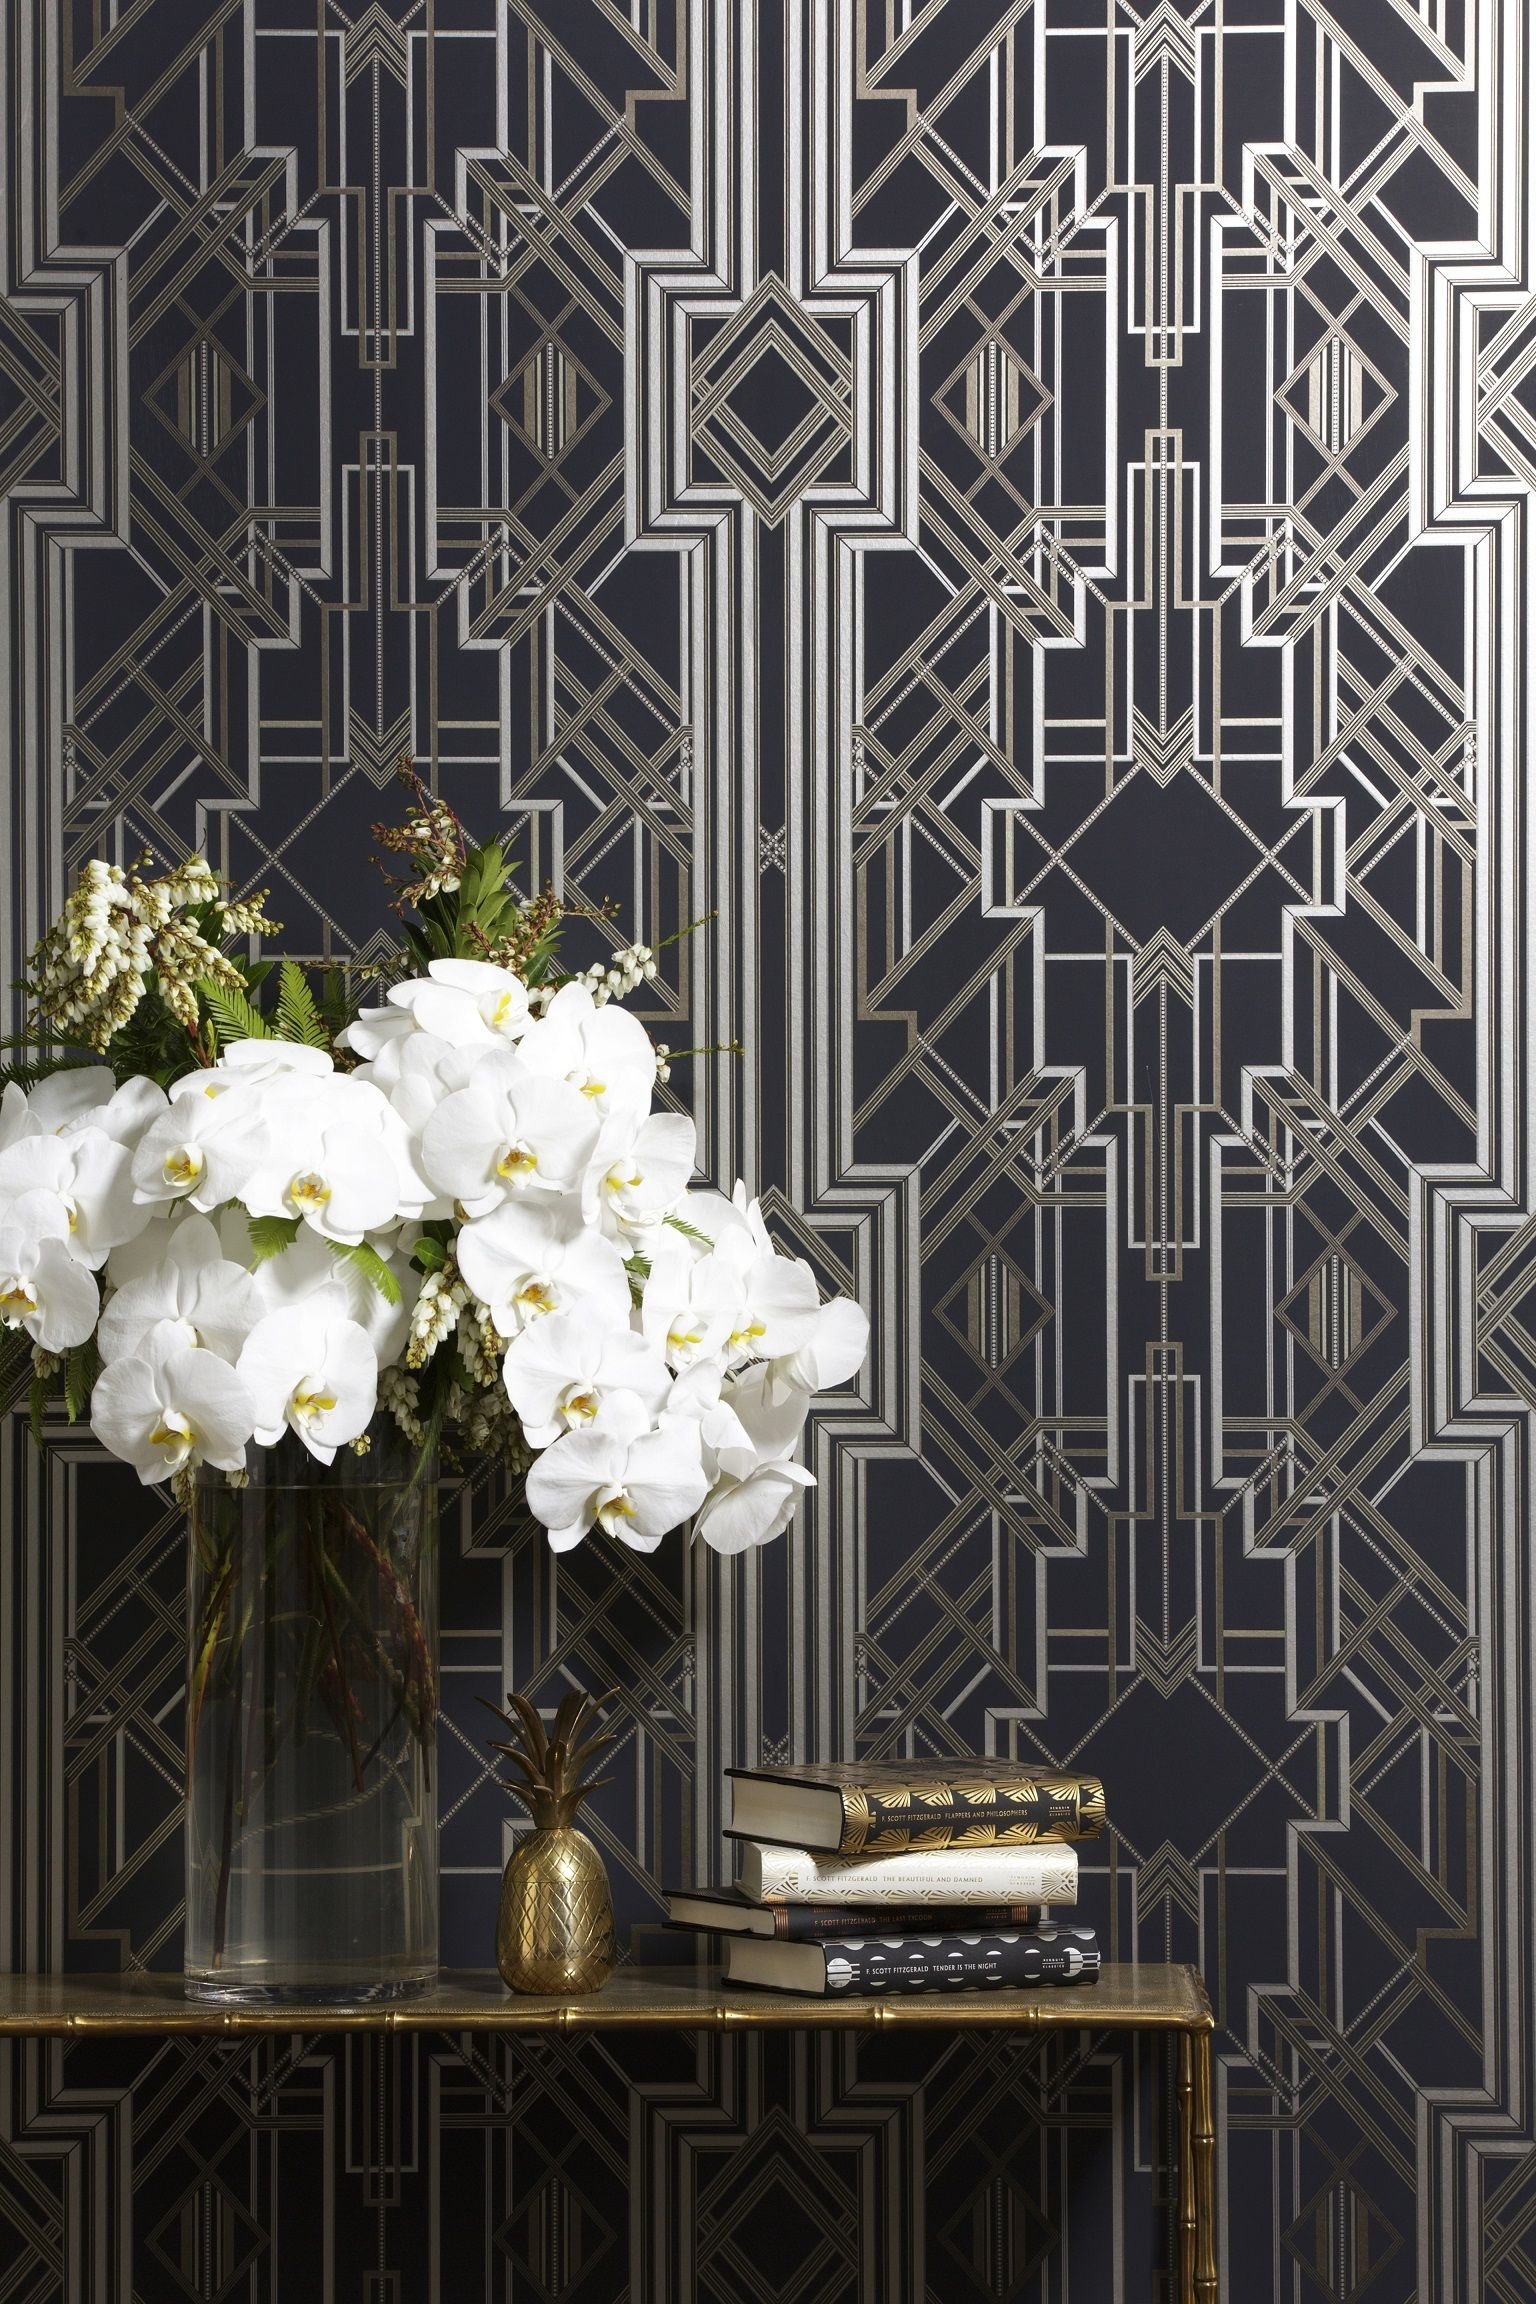 The Great Gatsby Iconic Art Deco Wallpaper Design / - Etsy